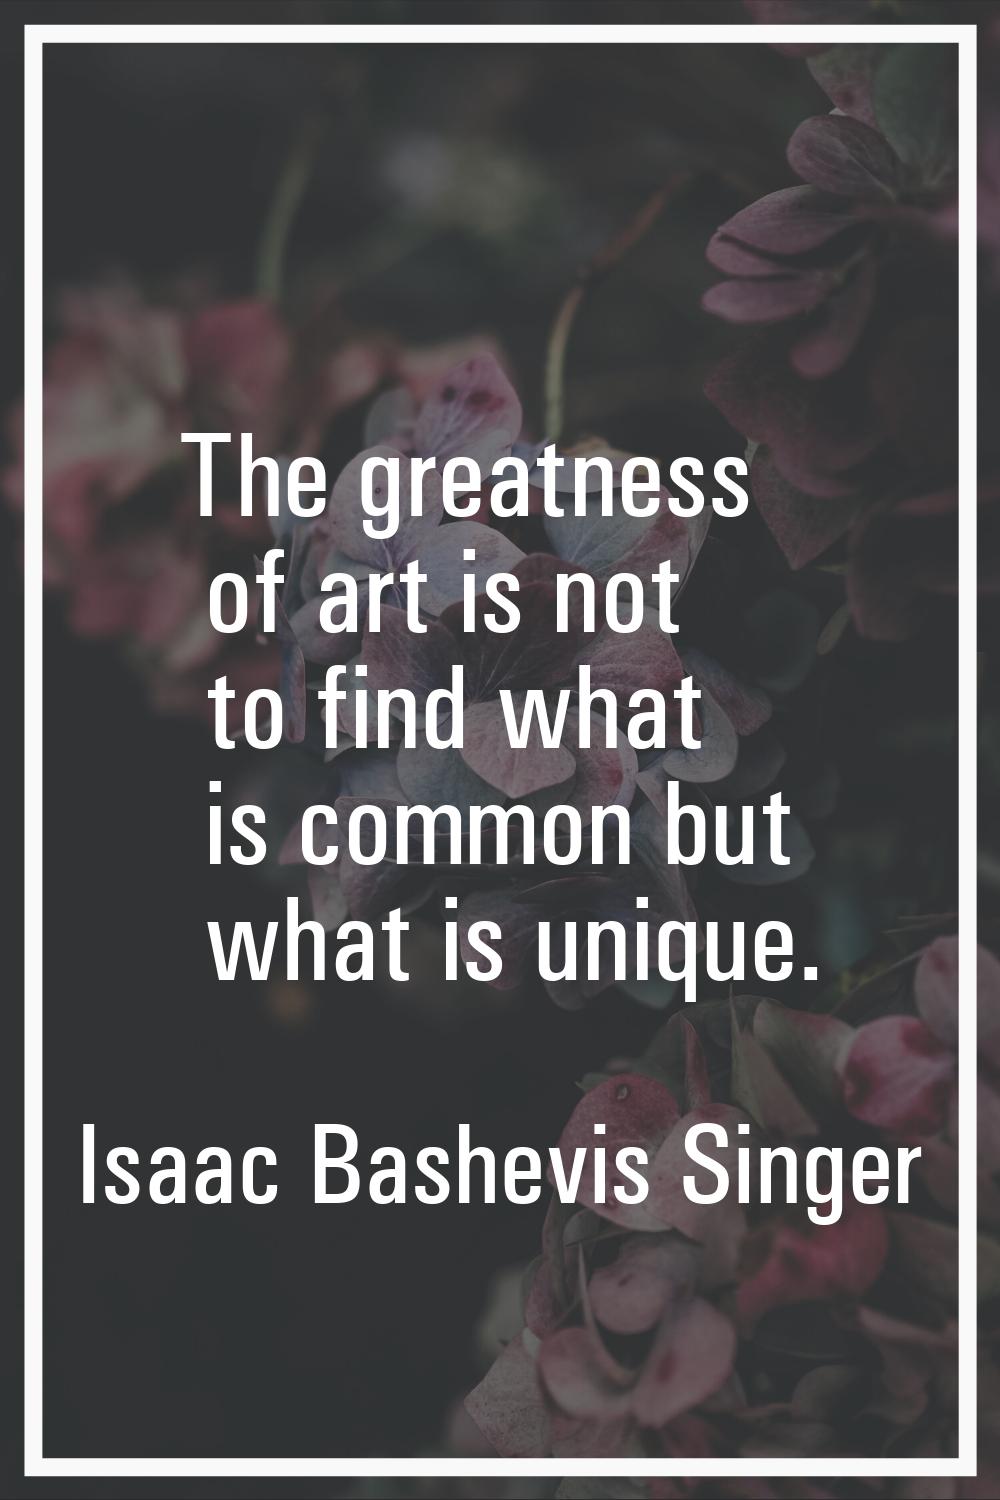 The greatness of art is not to find what is common but what is unique.